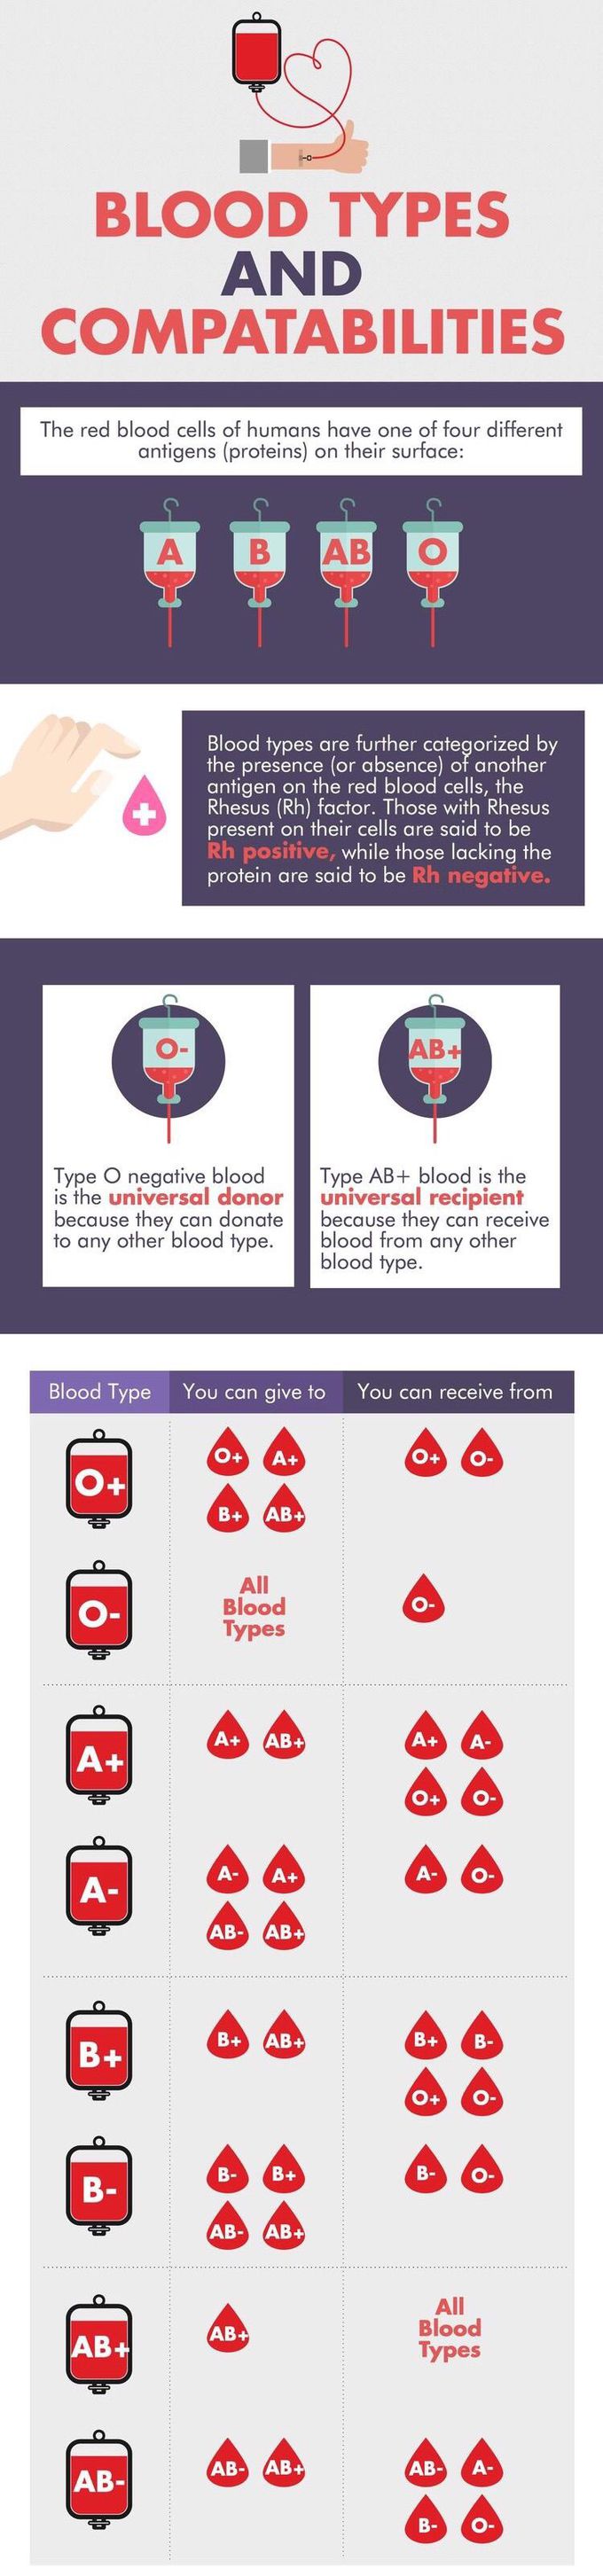 Blood types and compatibilities